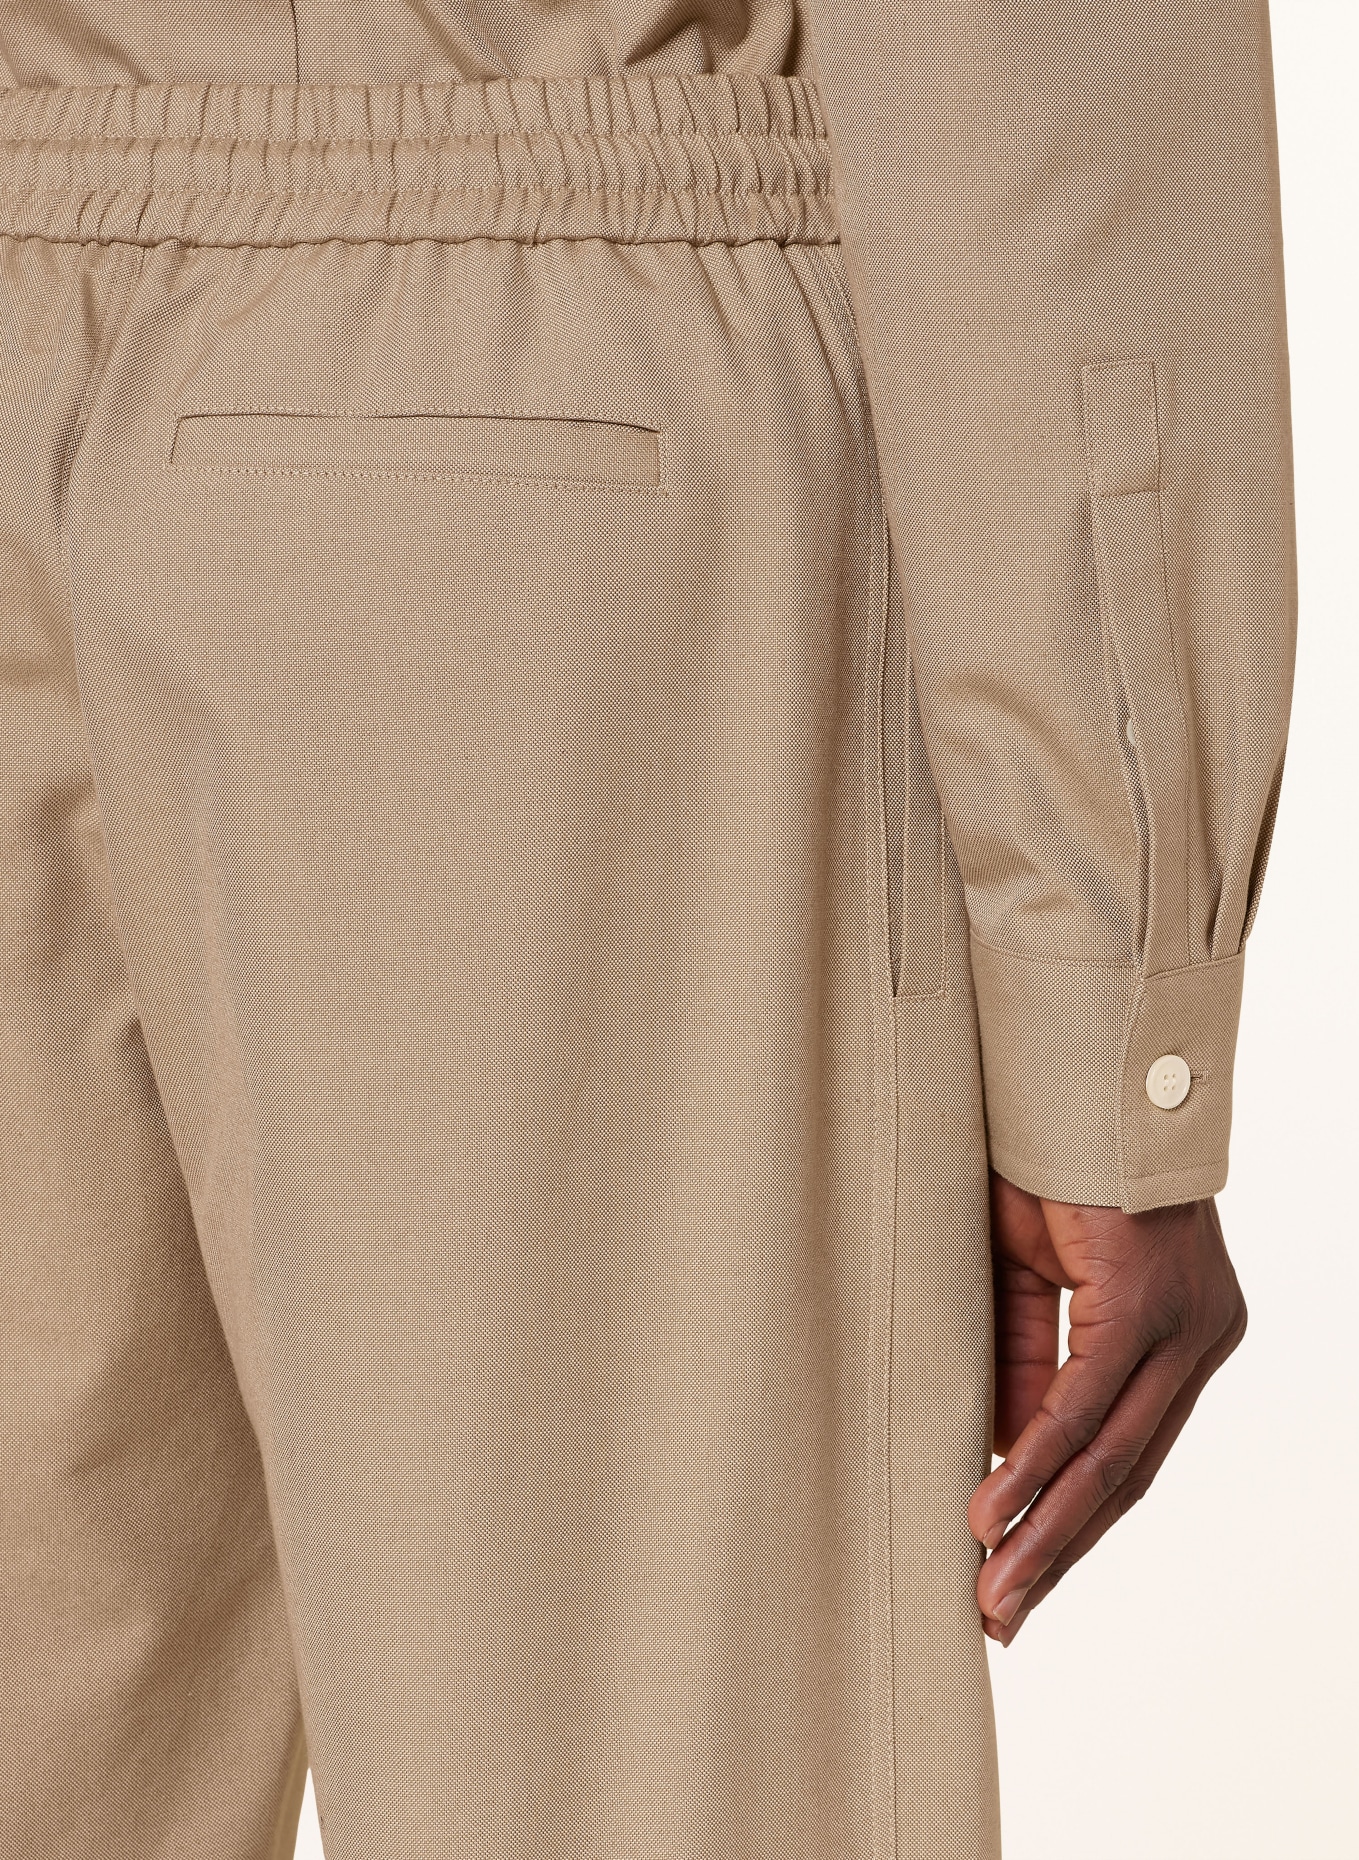 Alexander McQUEEN Pants in jogger style extra slim fit, Color: BEIGE (Image 5)